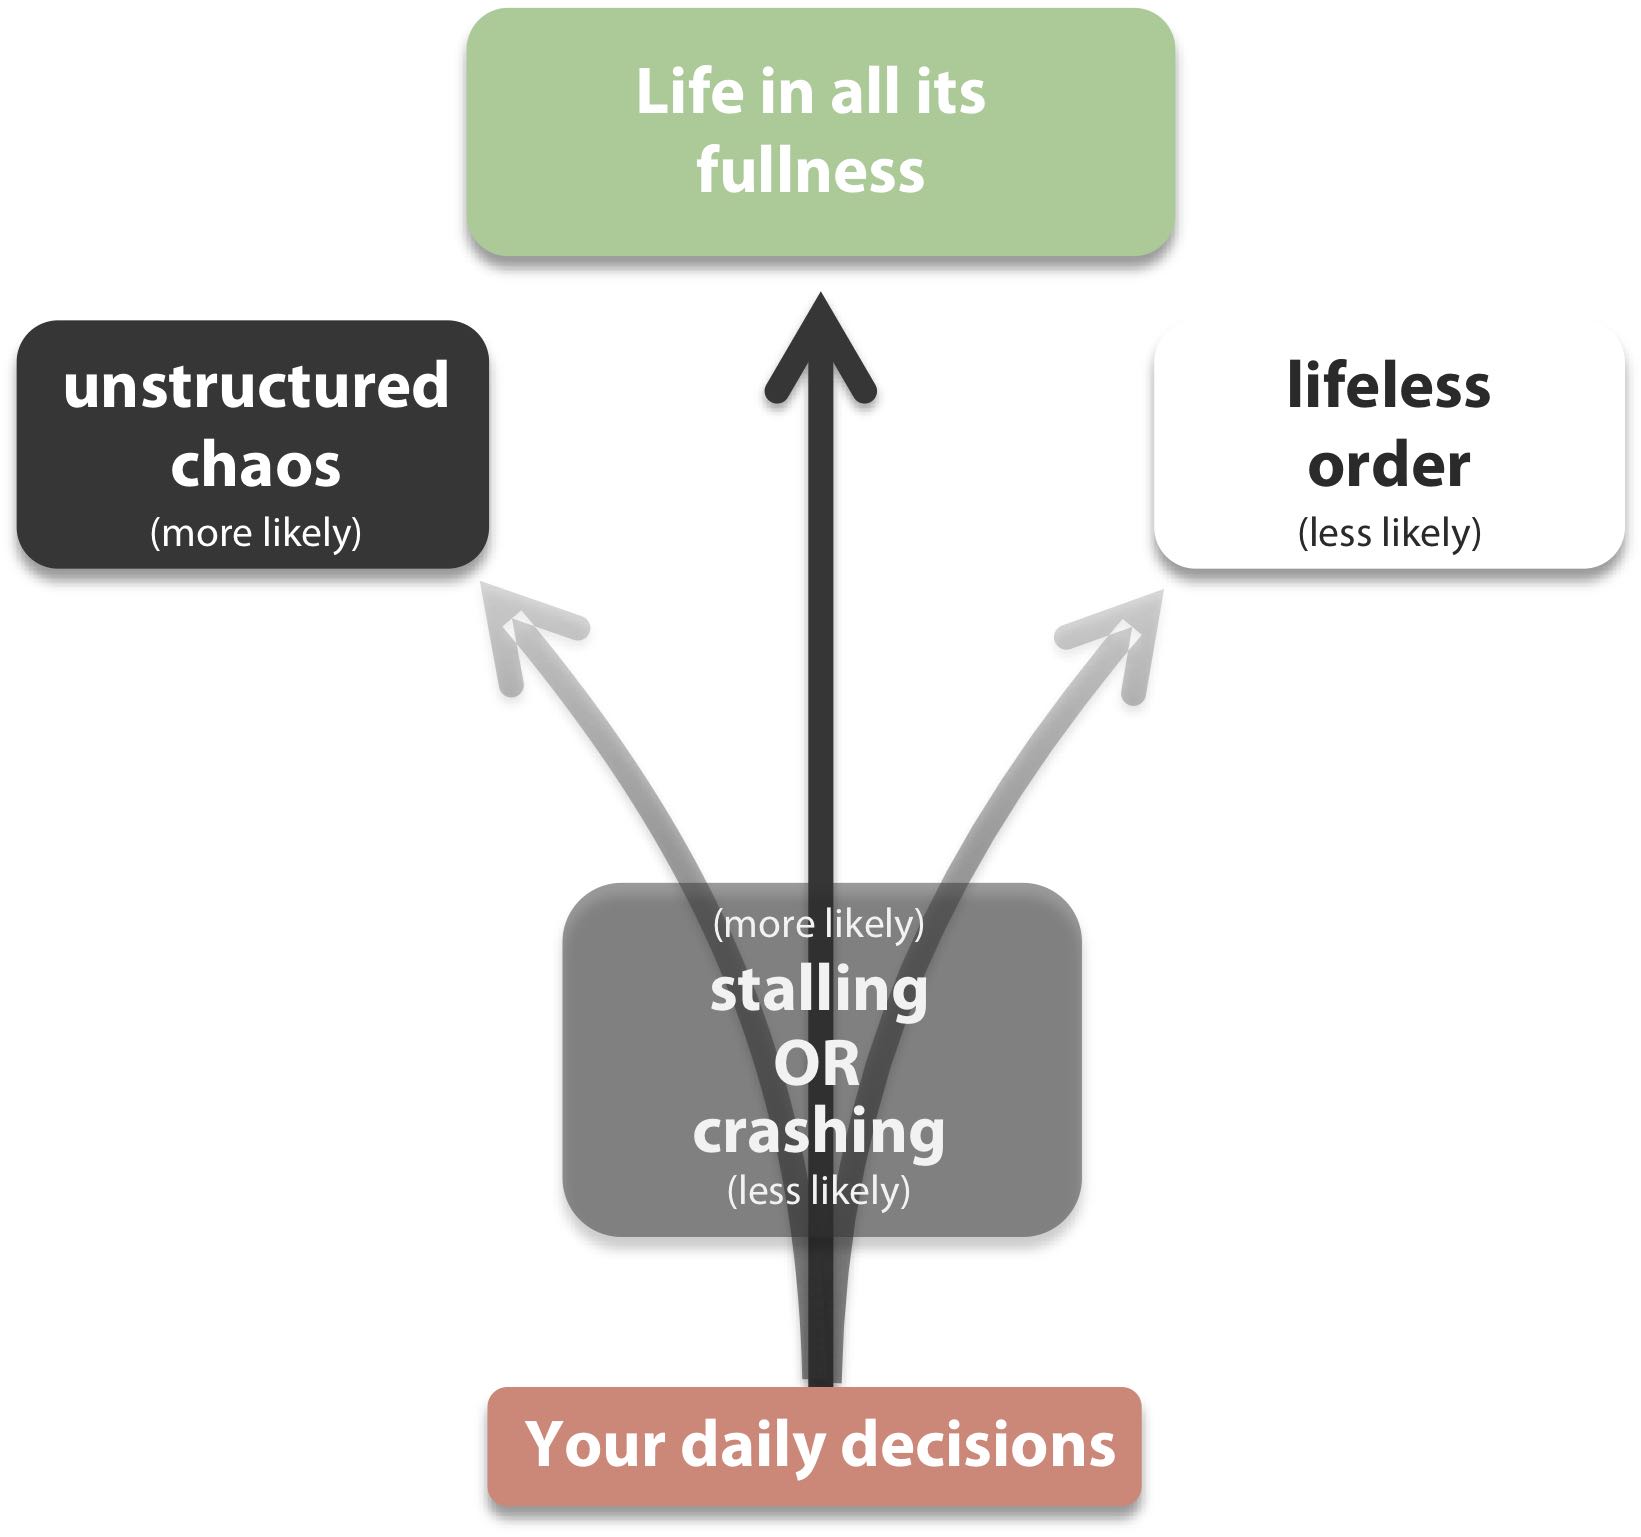 Where your decisions are currently taking you